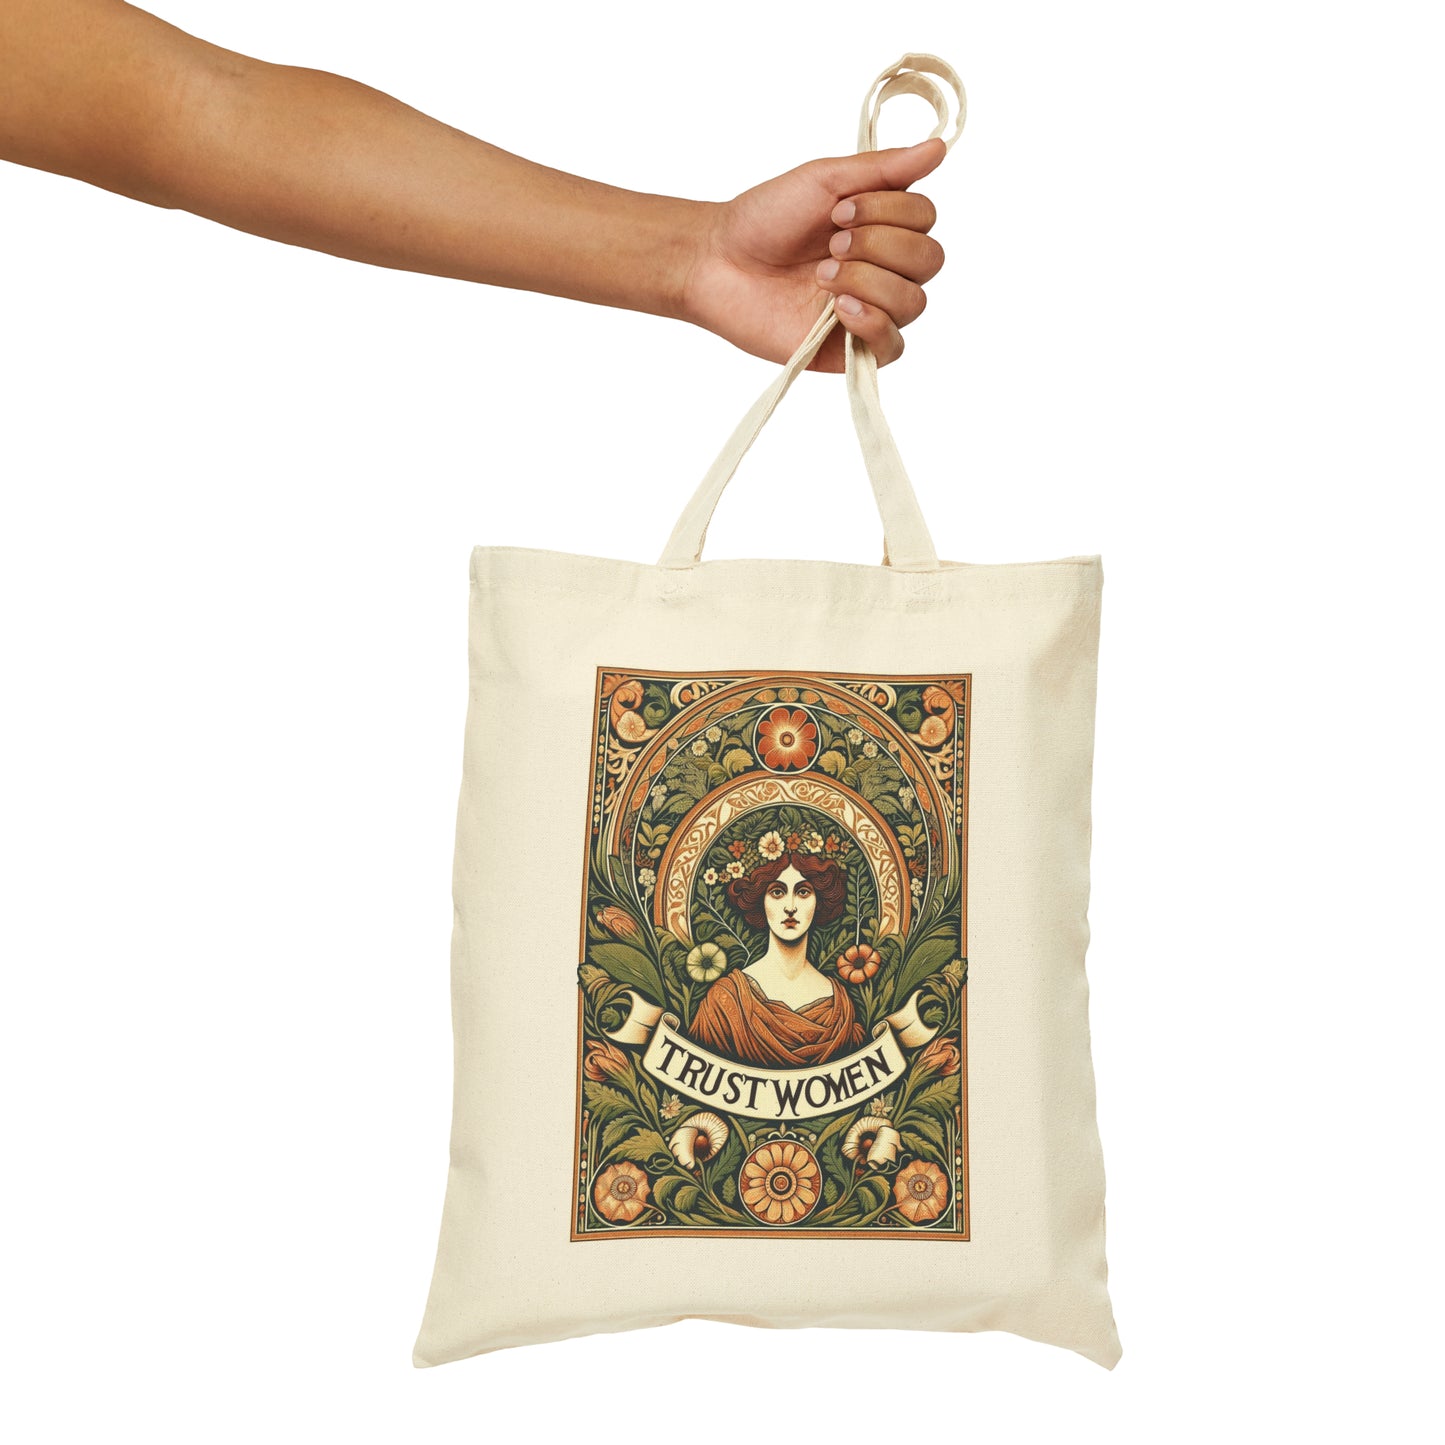 Inspirational Caring Statement Cotton Canvas Tote Bag: Trust Women! & carry a laptop, kindle, phone, notebook, goodies to work/coffee shop